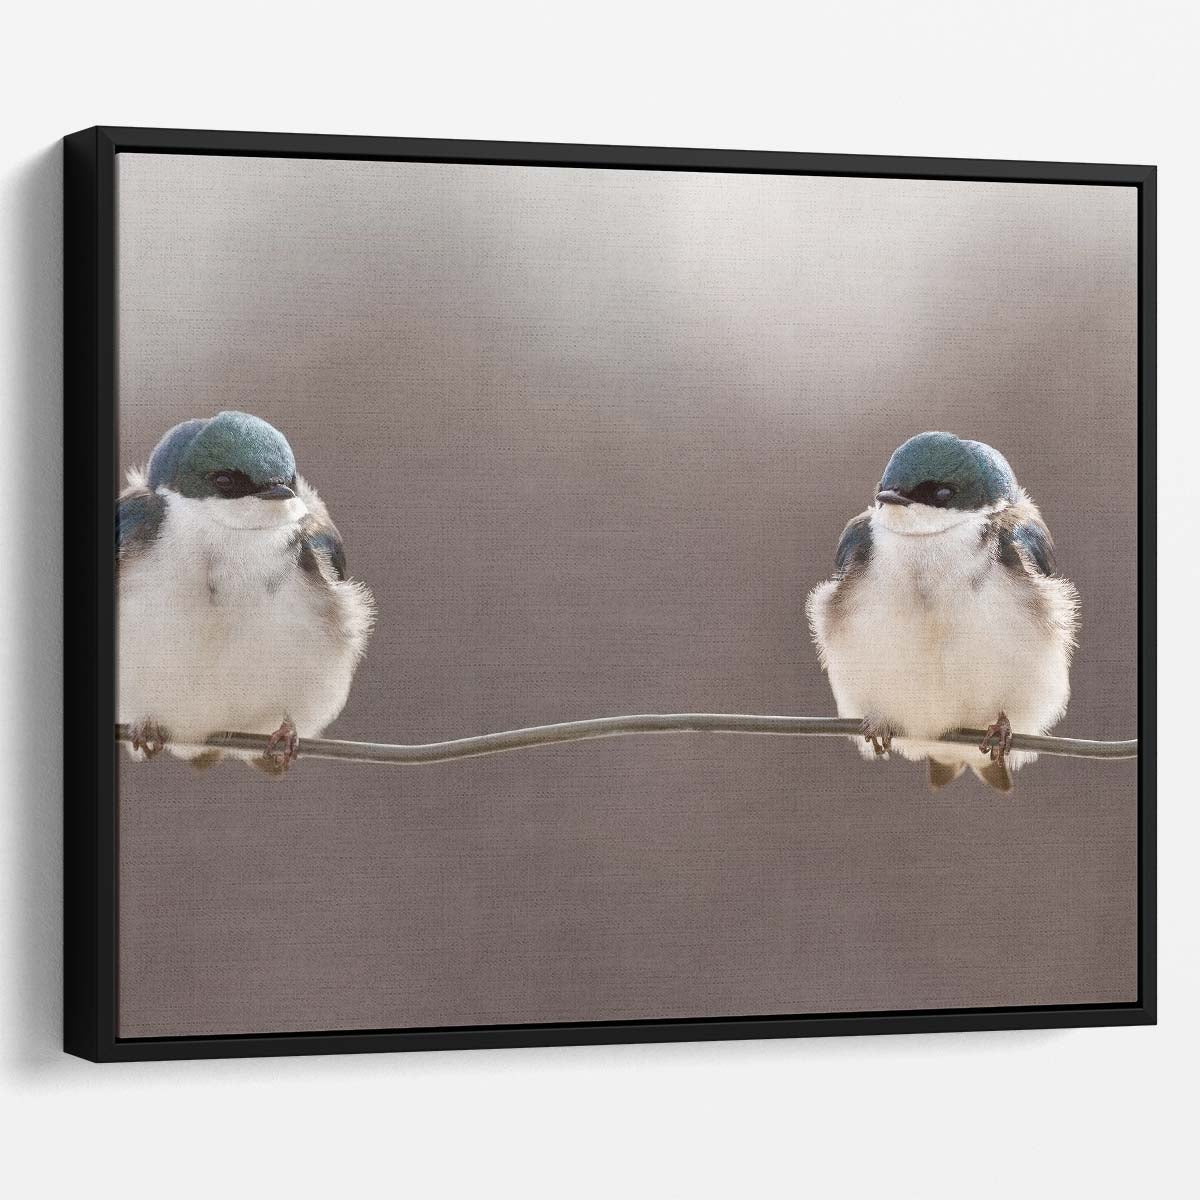 Frosty Dawn Birds on Wire Winter Wall Art by Luxuriance Designs. Made in USA.